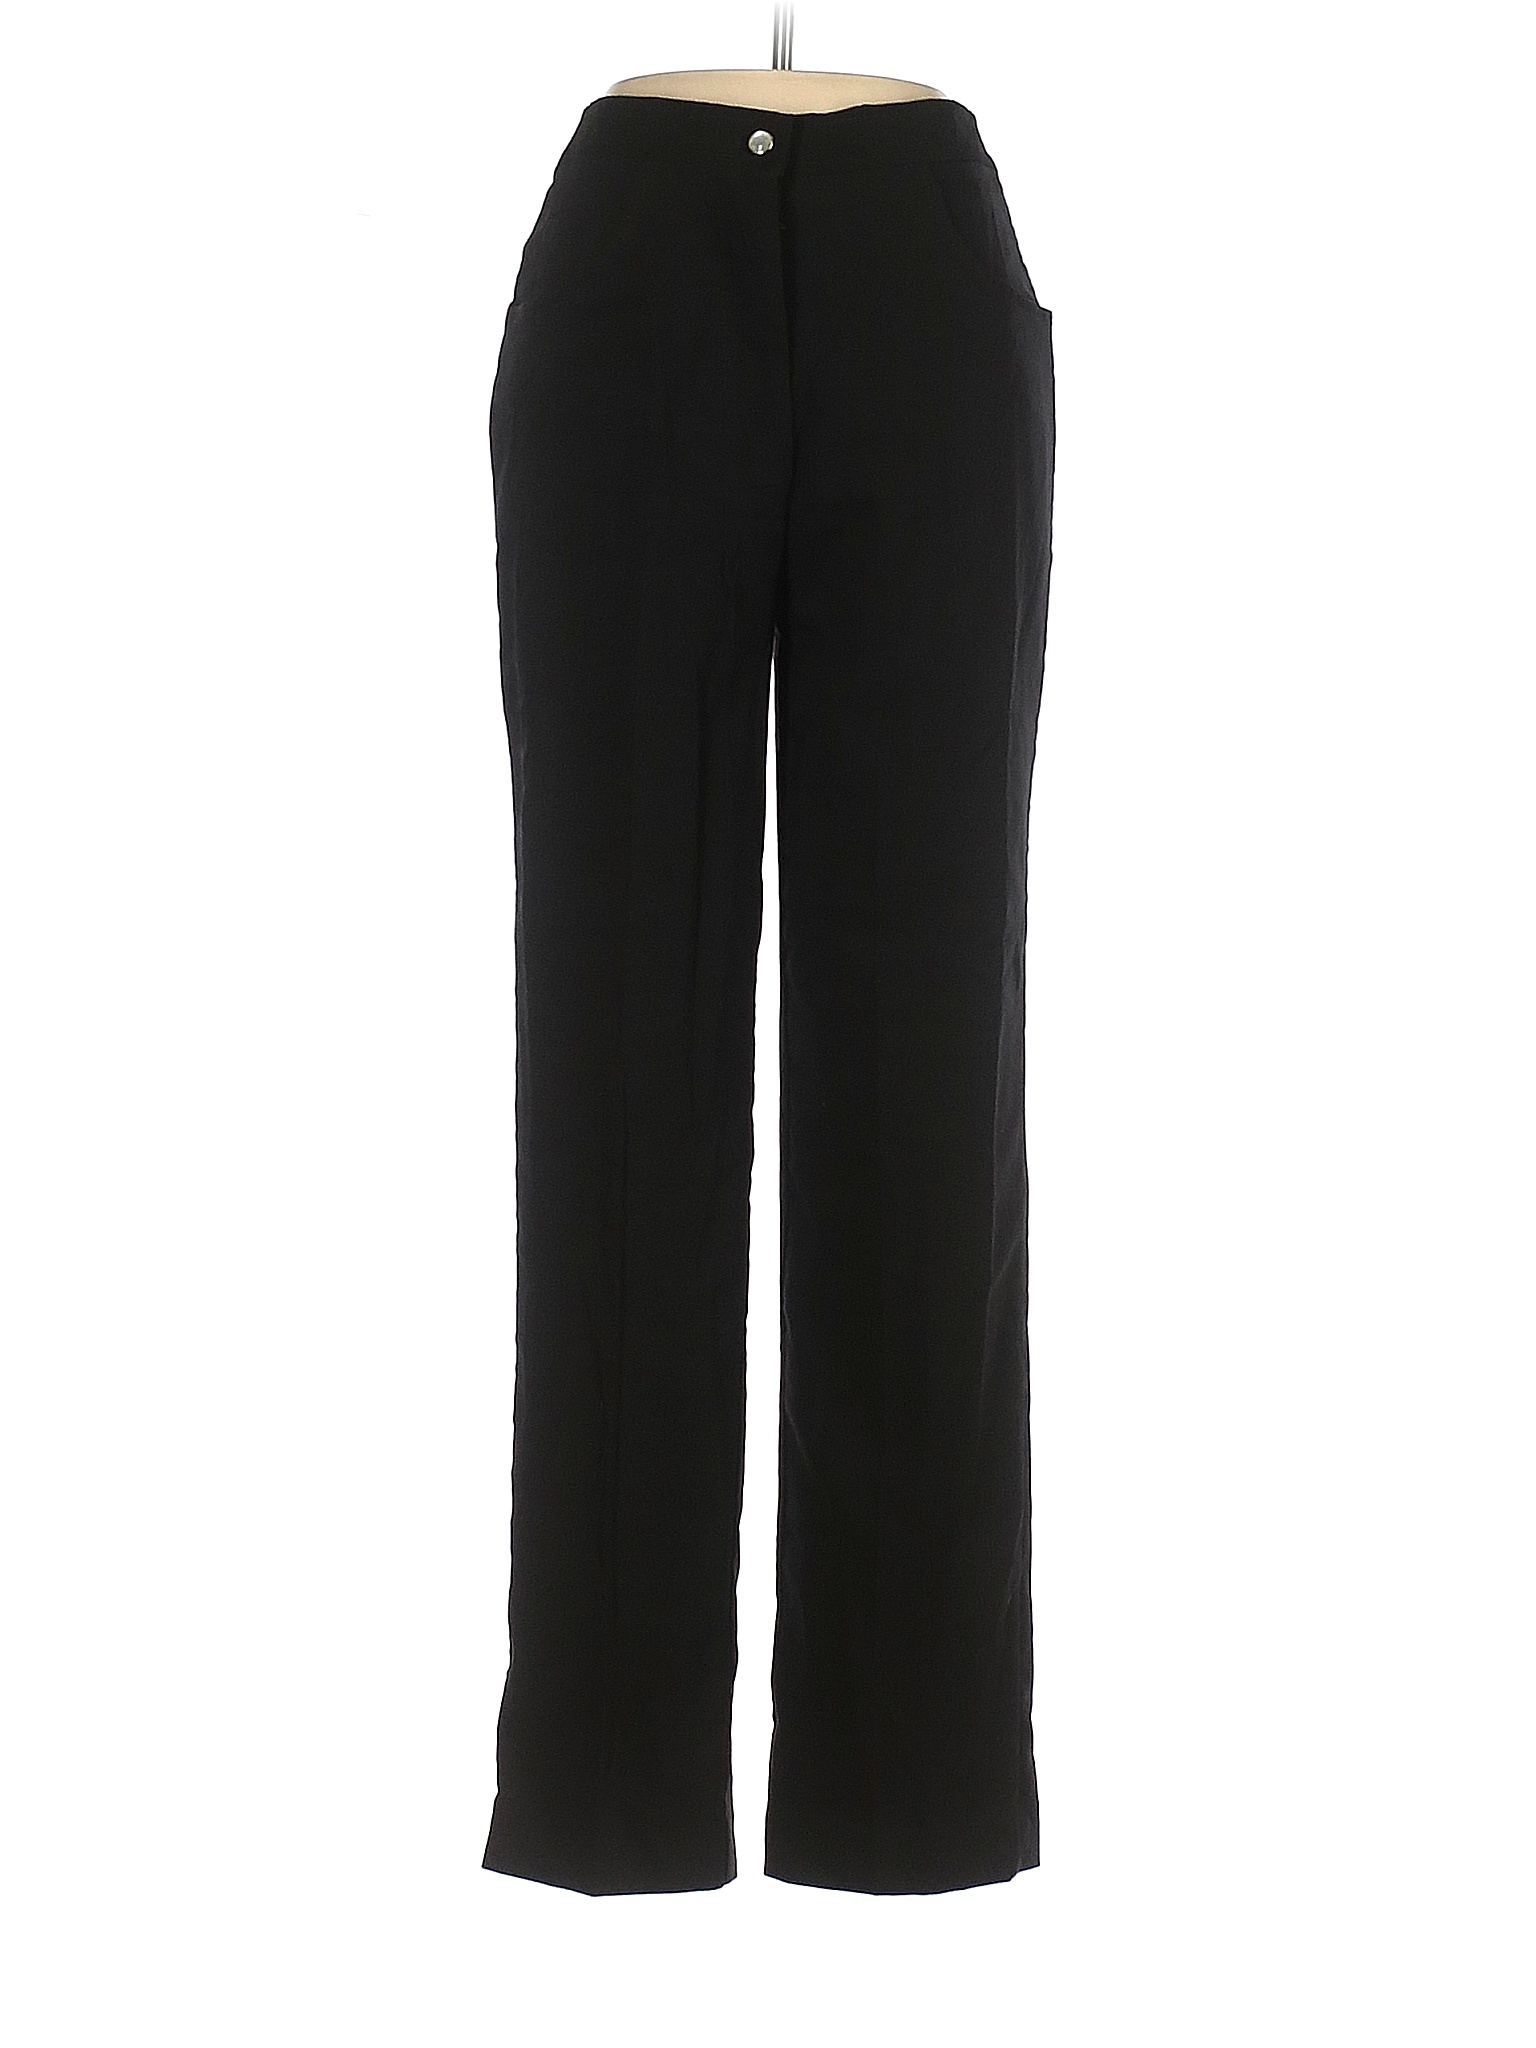 Blair Solid Black Casual Pants Size 8 - 65% off | thredUP